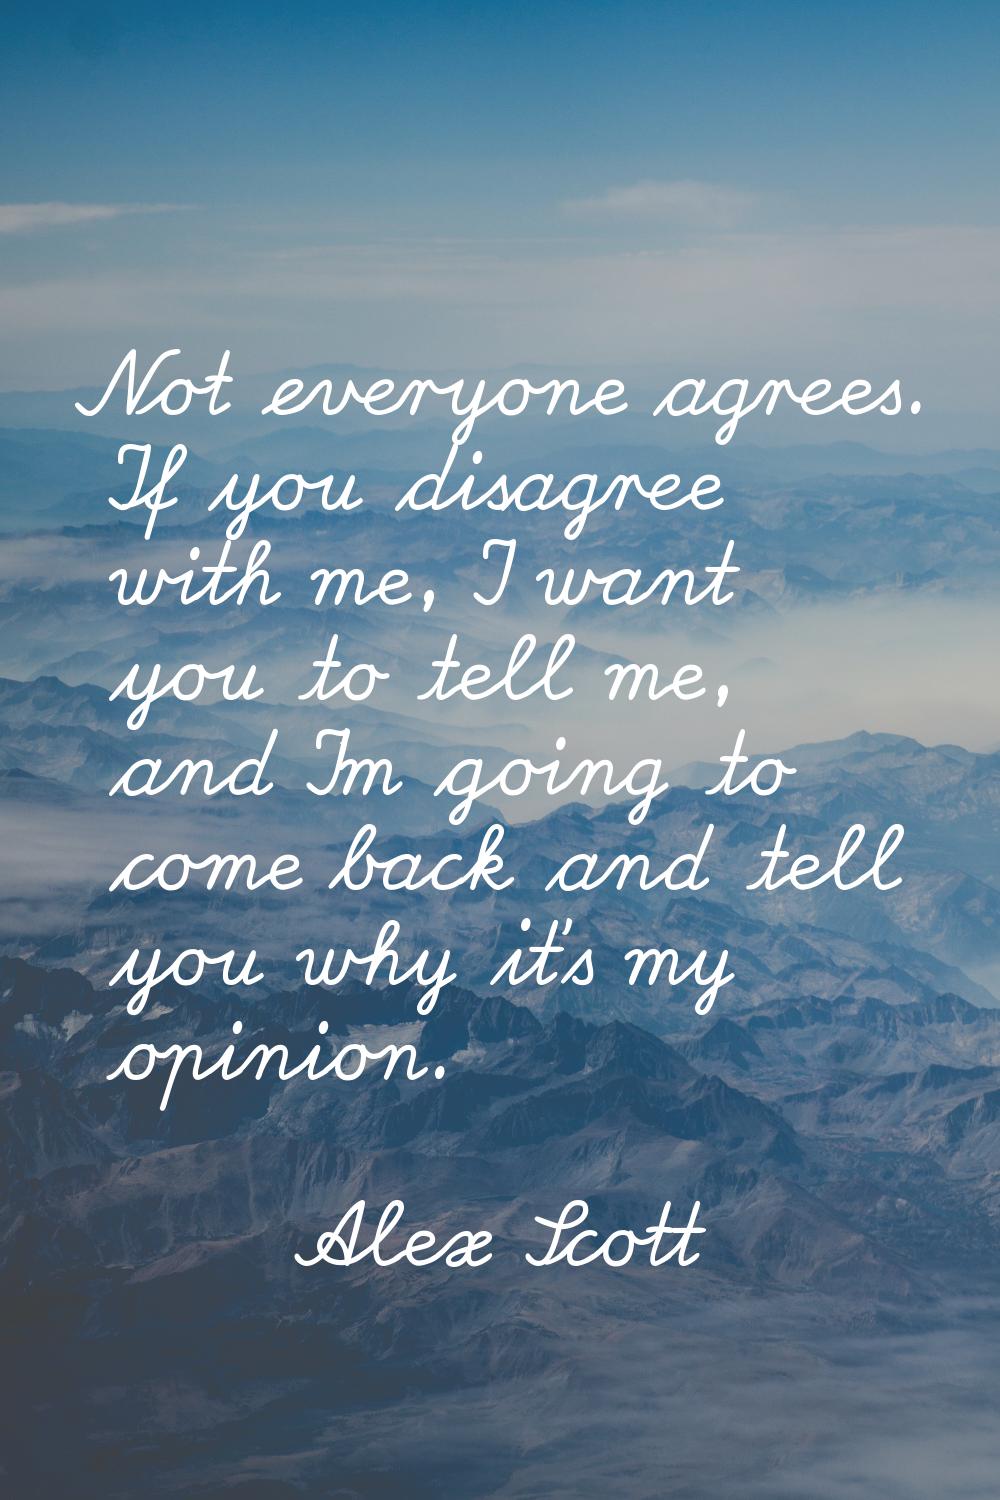 Not everyone agrees. If you disagree with me, I want you to tell me, and I'm going to come back and